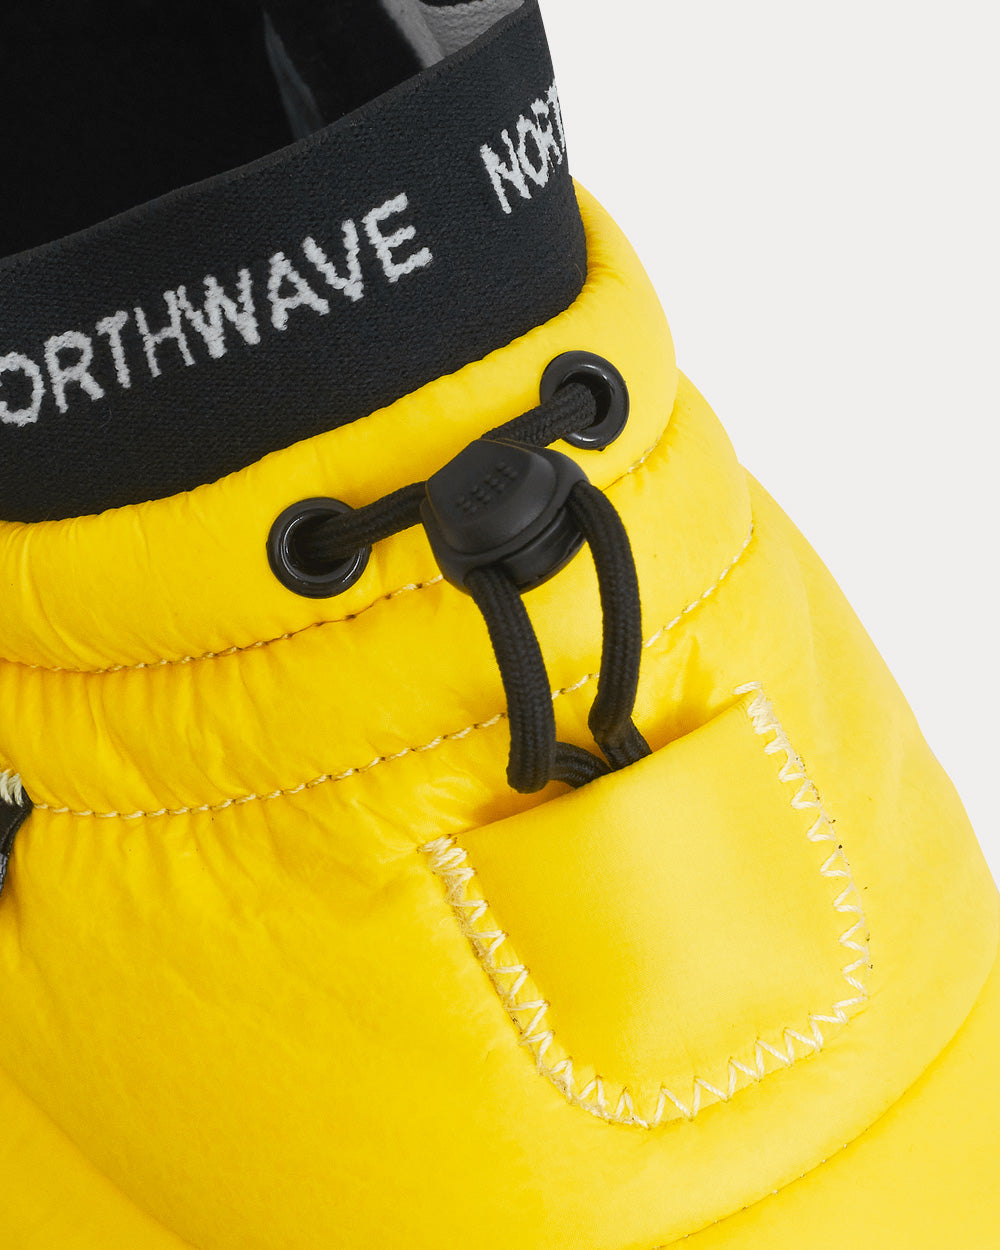 Northwave - Lock Lace Model Yellow High Top Sneakers